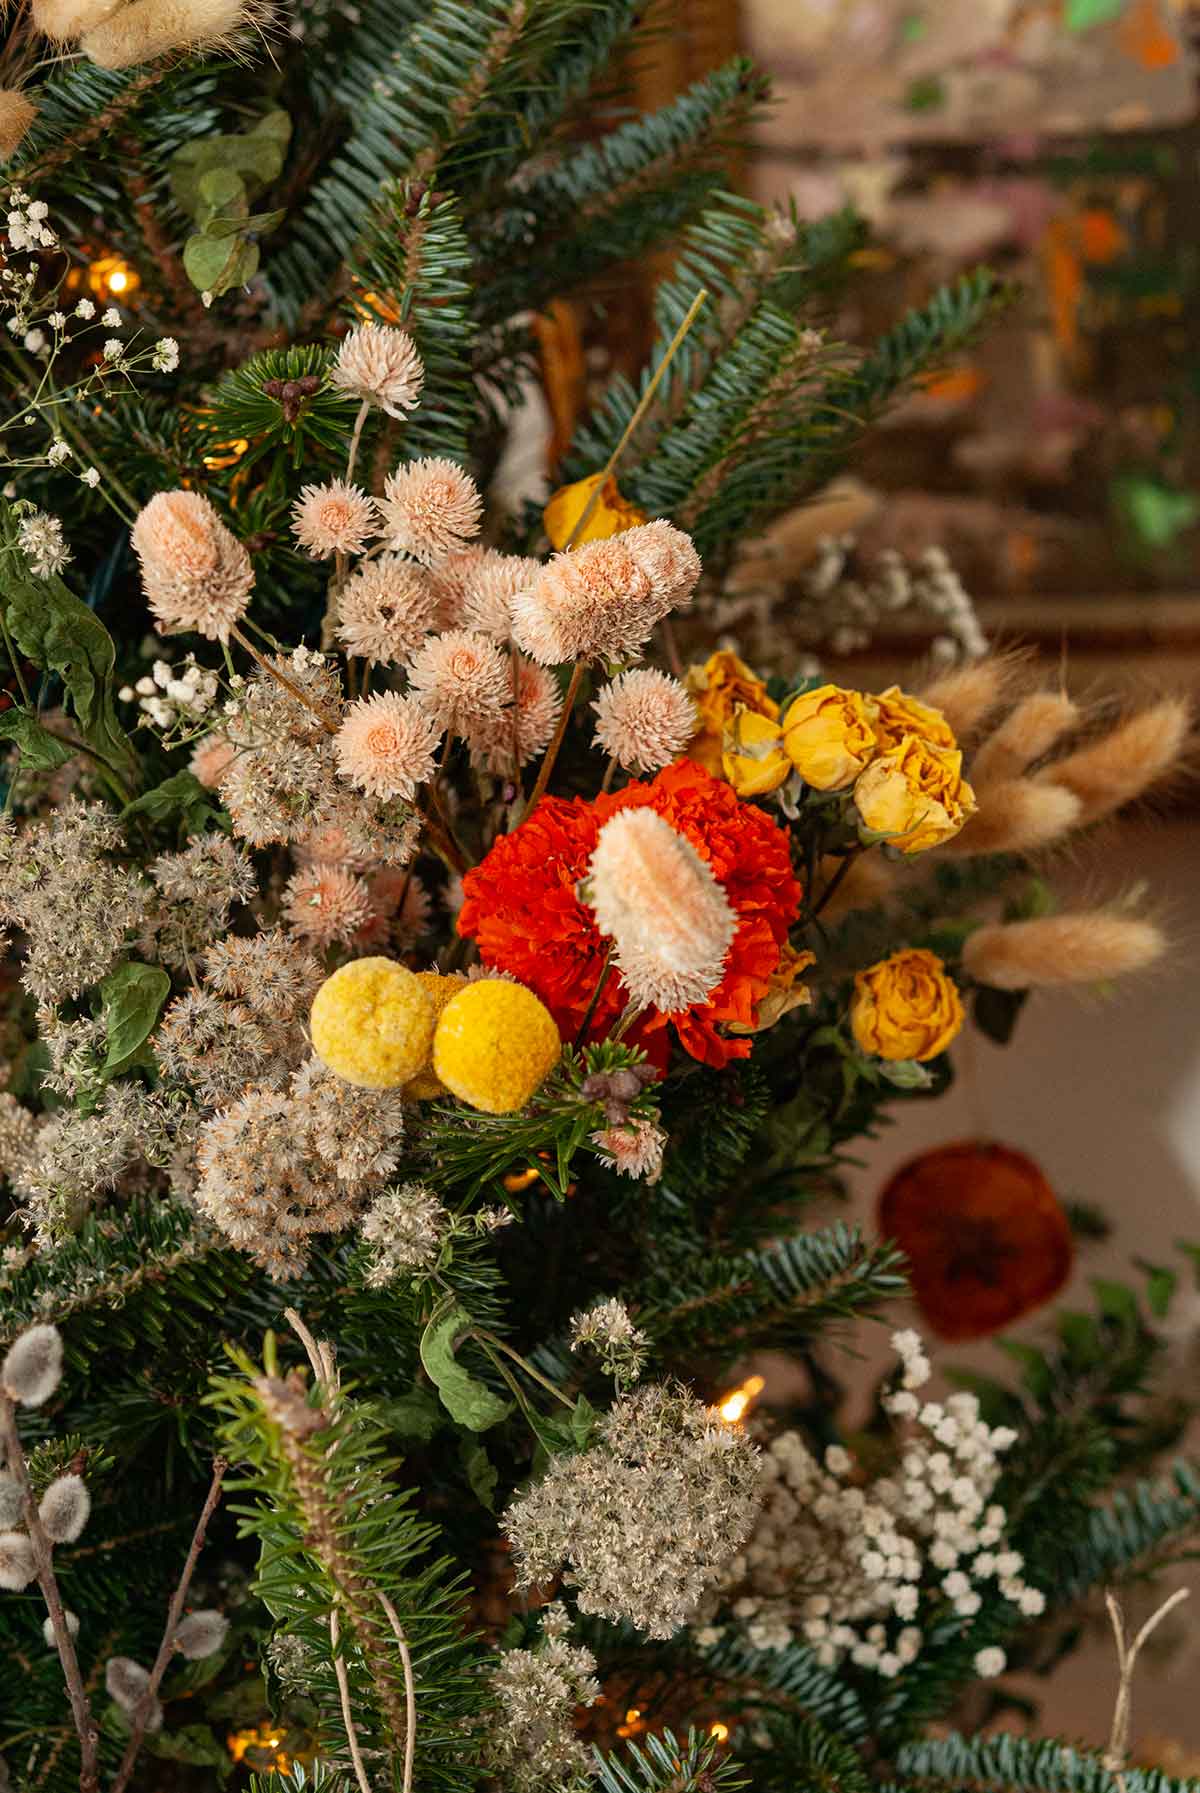 Bouquets of flowers in a Christmas tree.